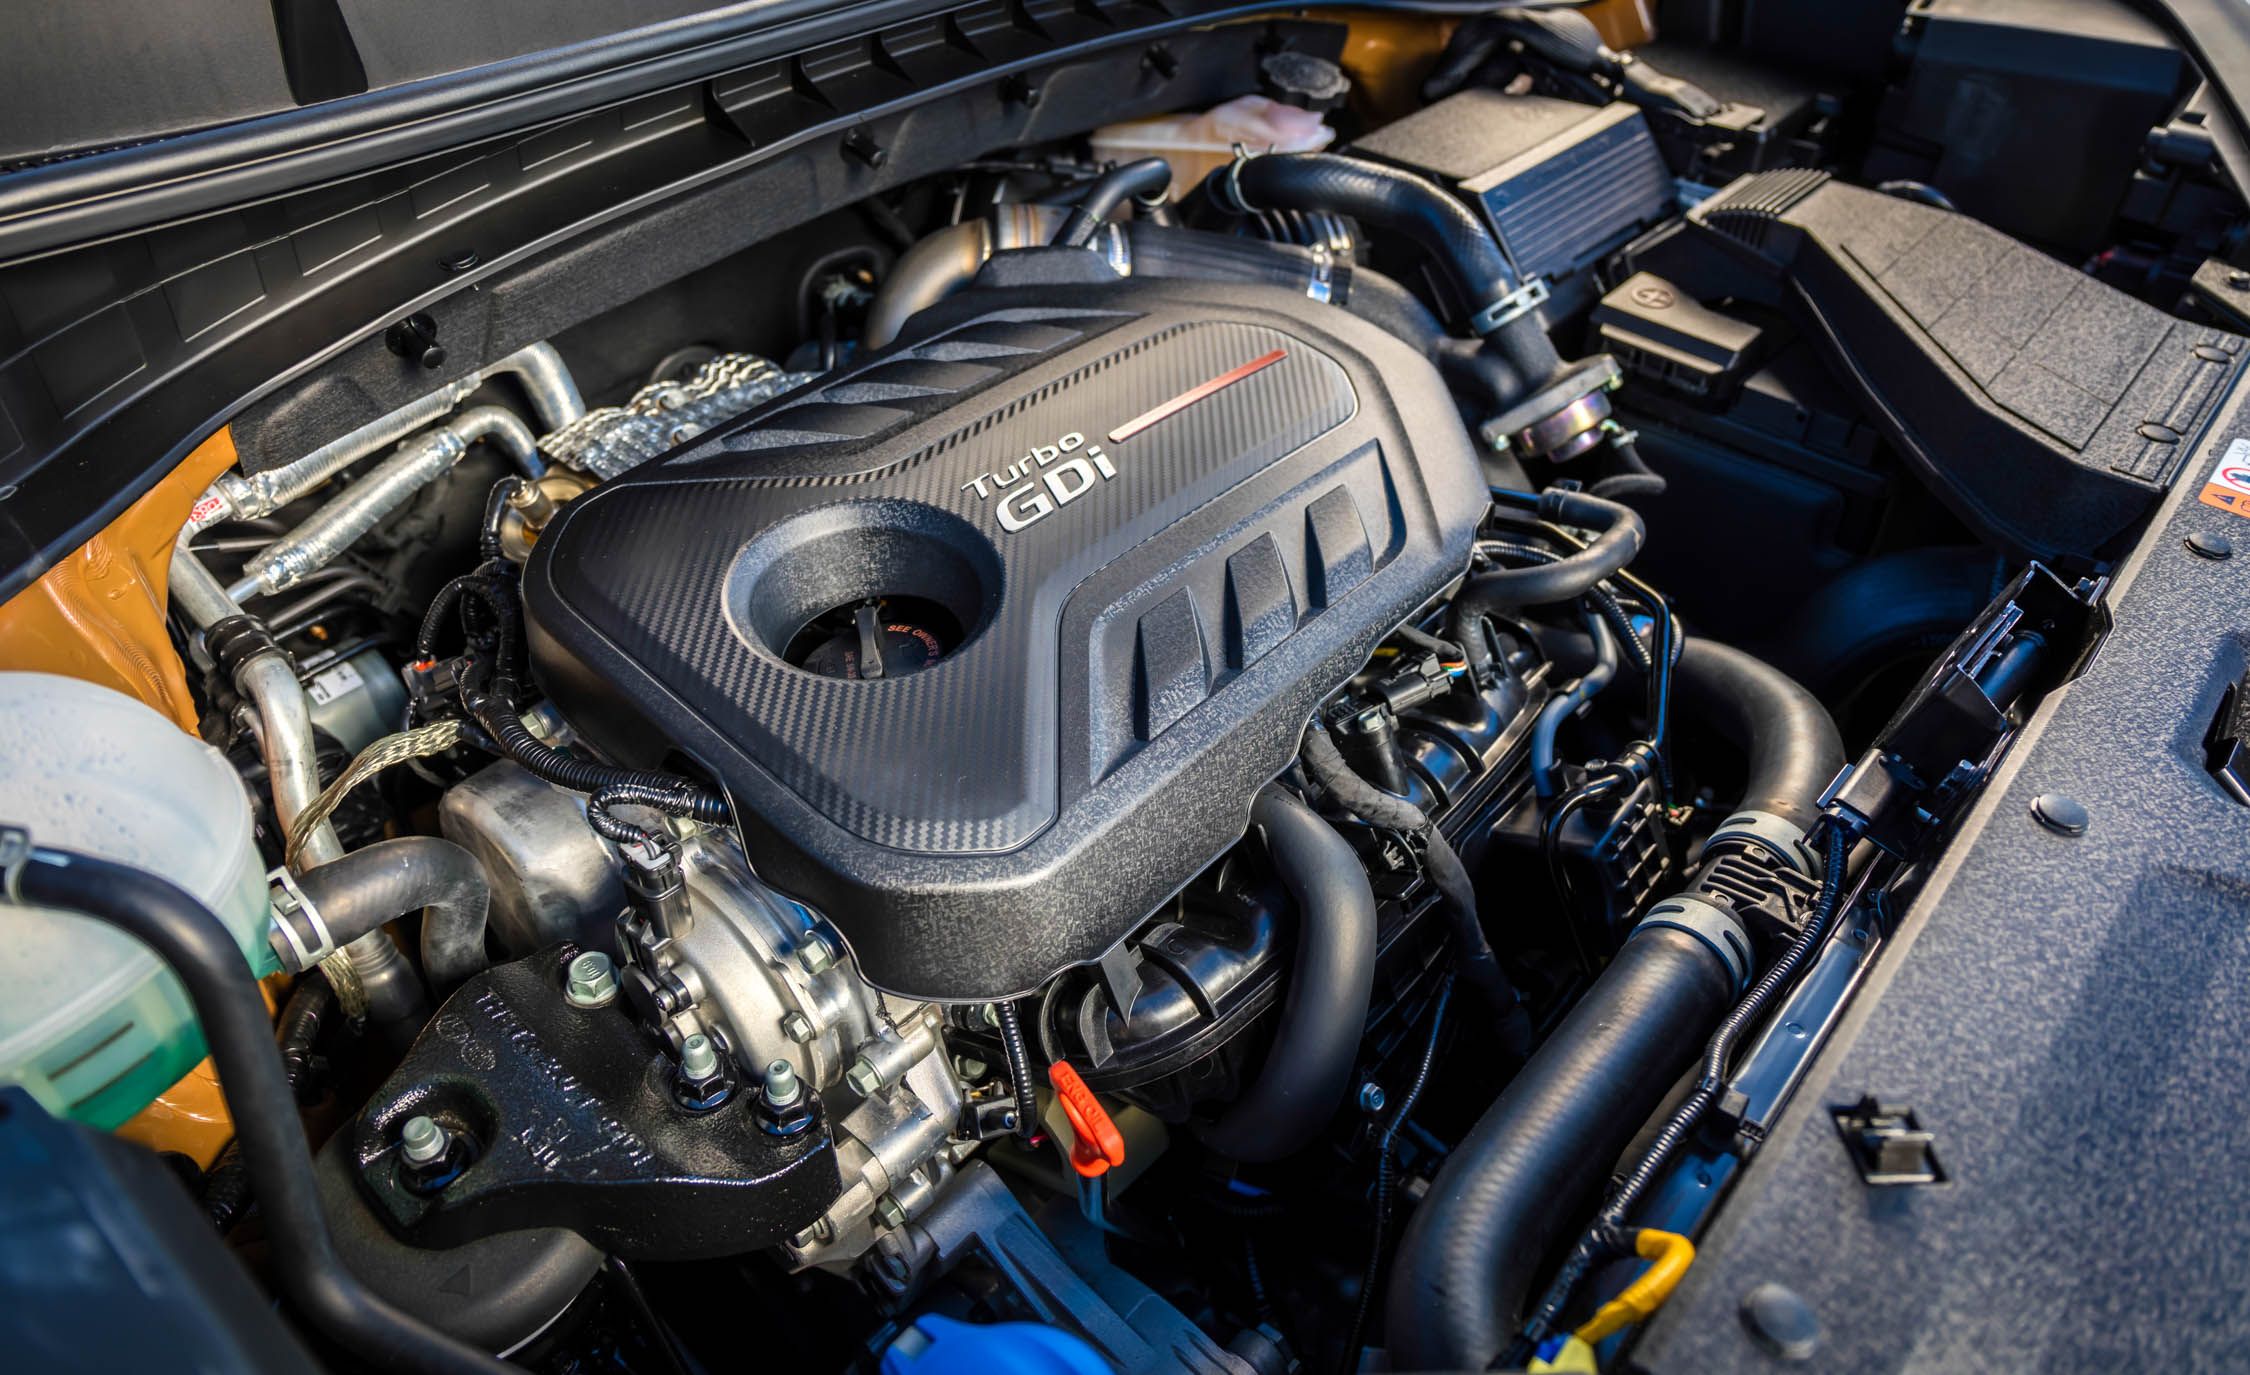 Kia Sportage Engines, Driving and Performance